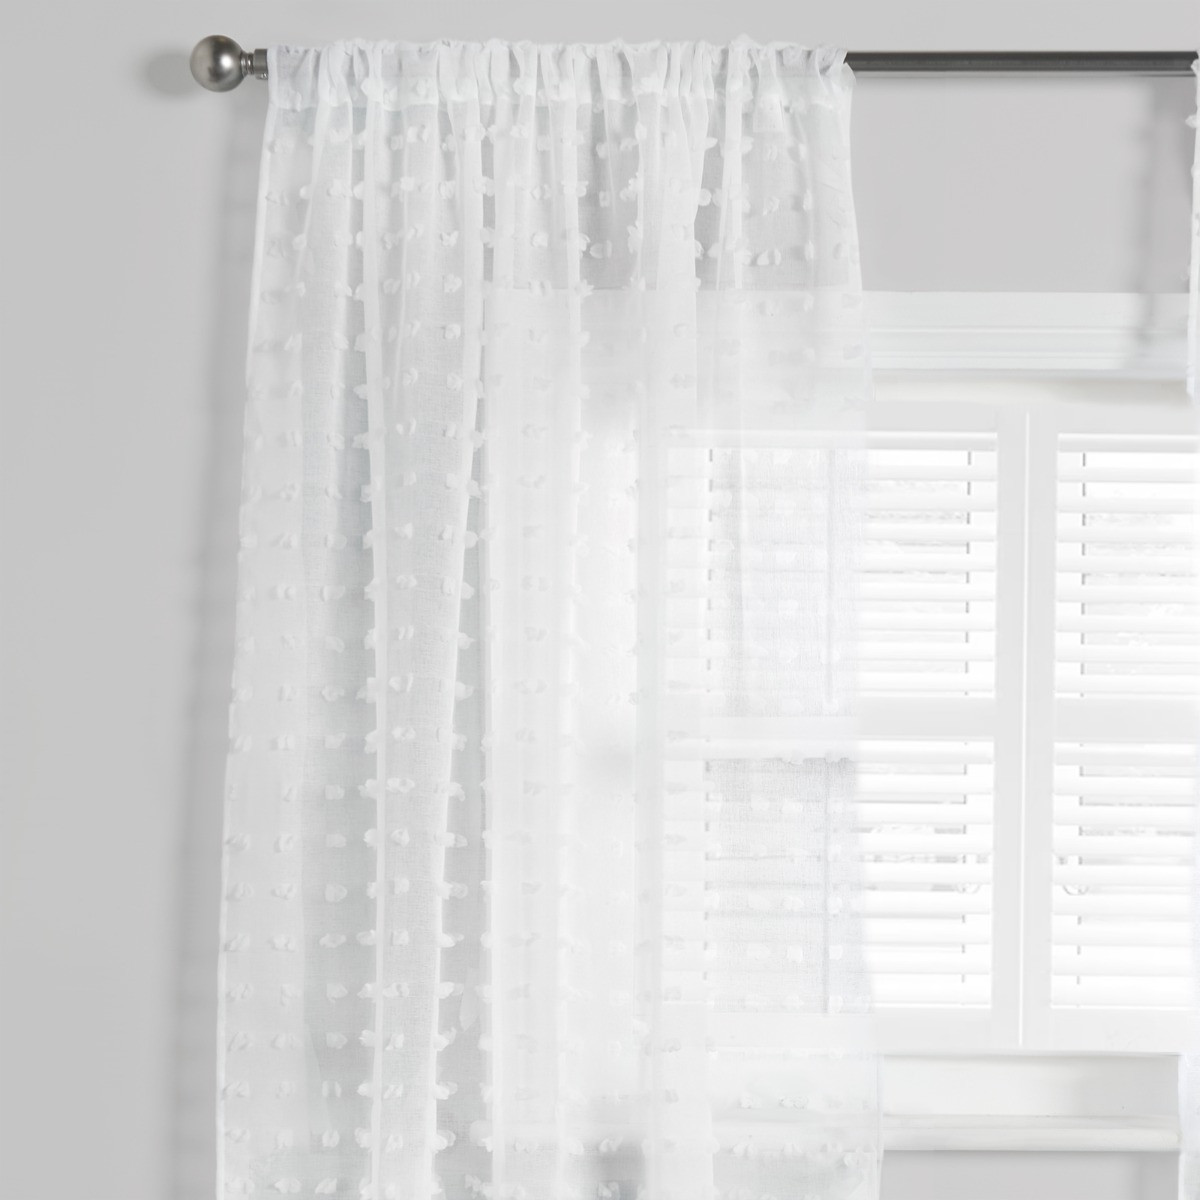 OHS Pompom Tufted Voile Curtains (Pair) - White>